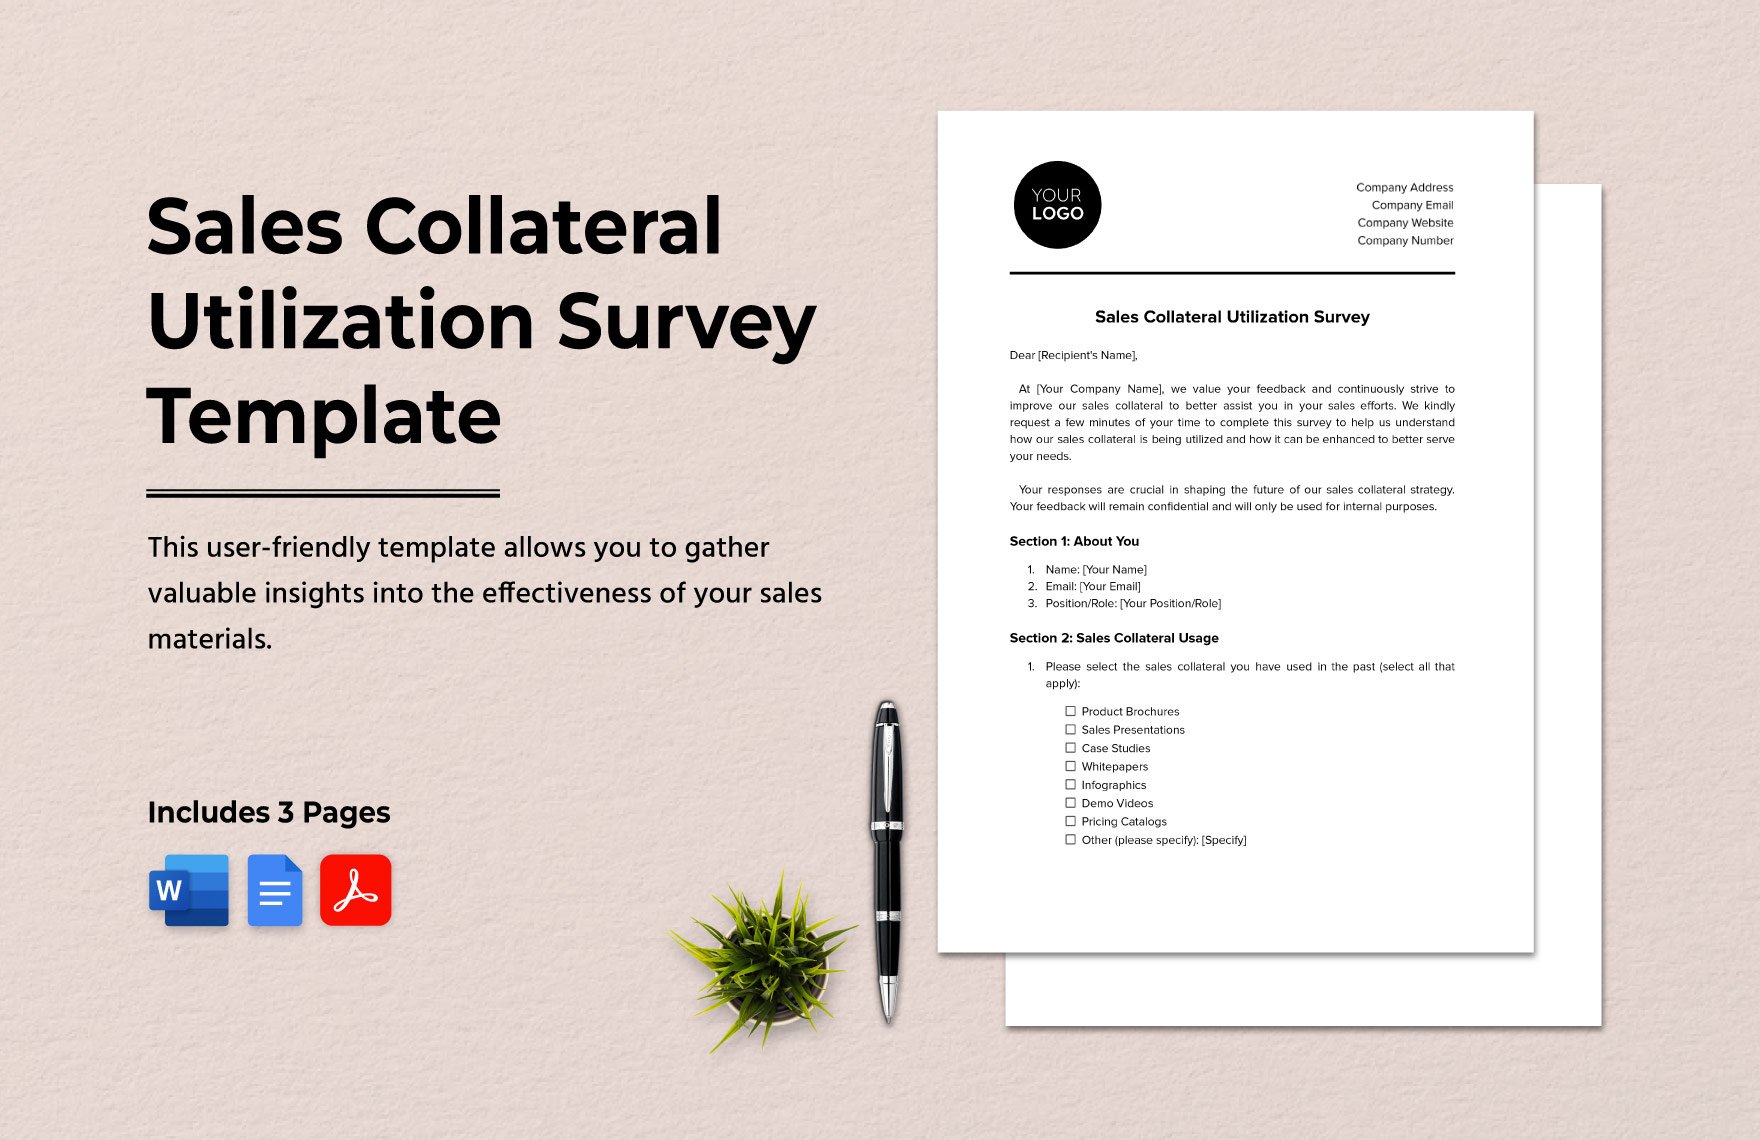 Sales Collateral Utilization Survey Template in Word, Google Docs, PDF